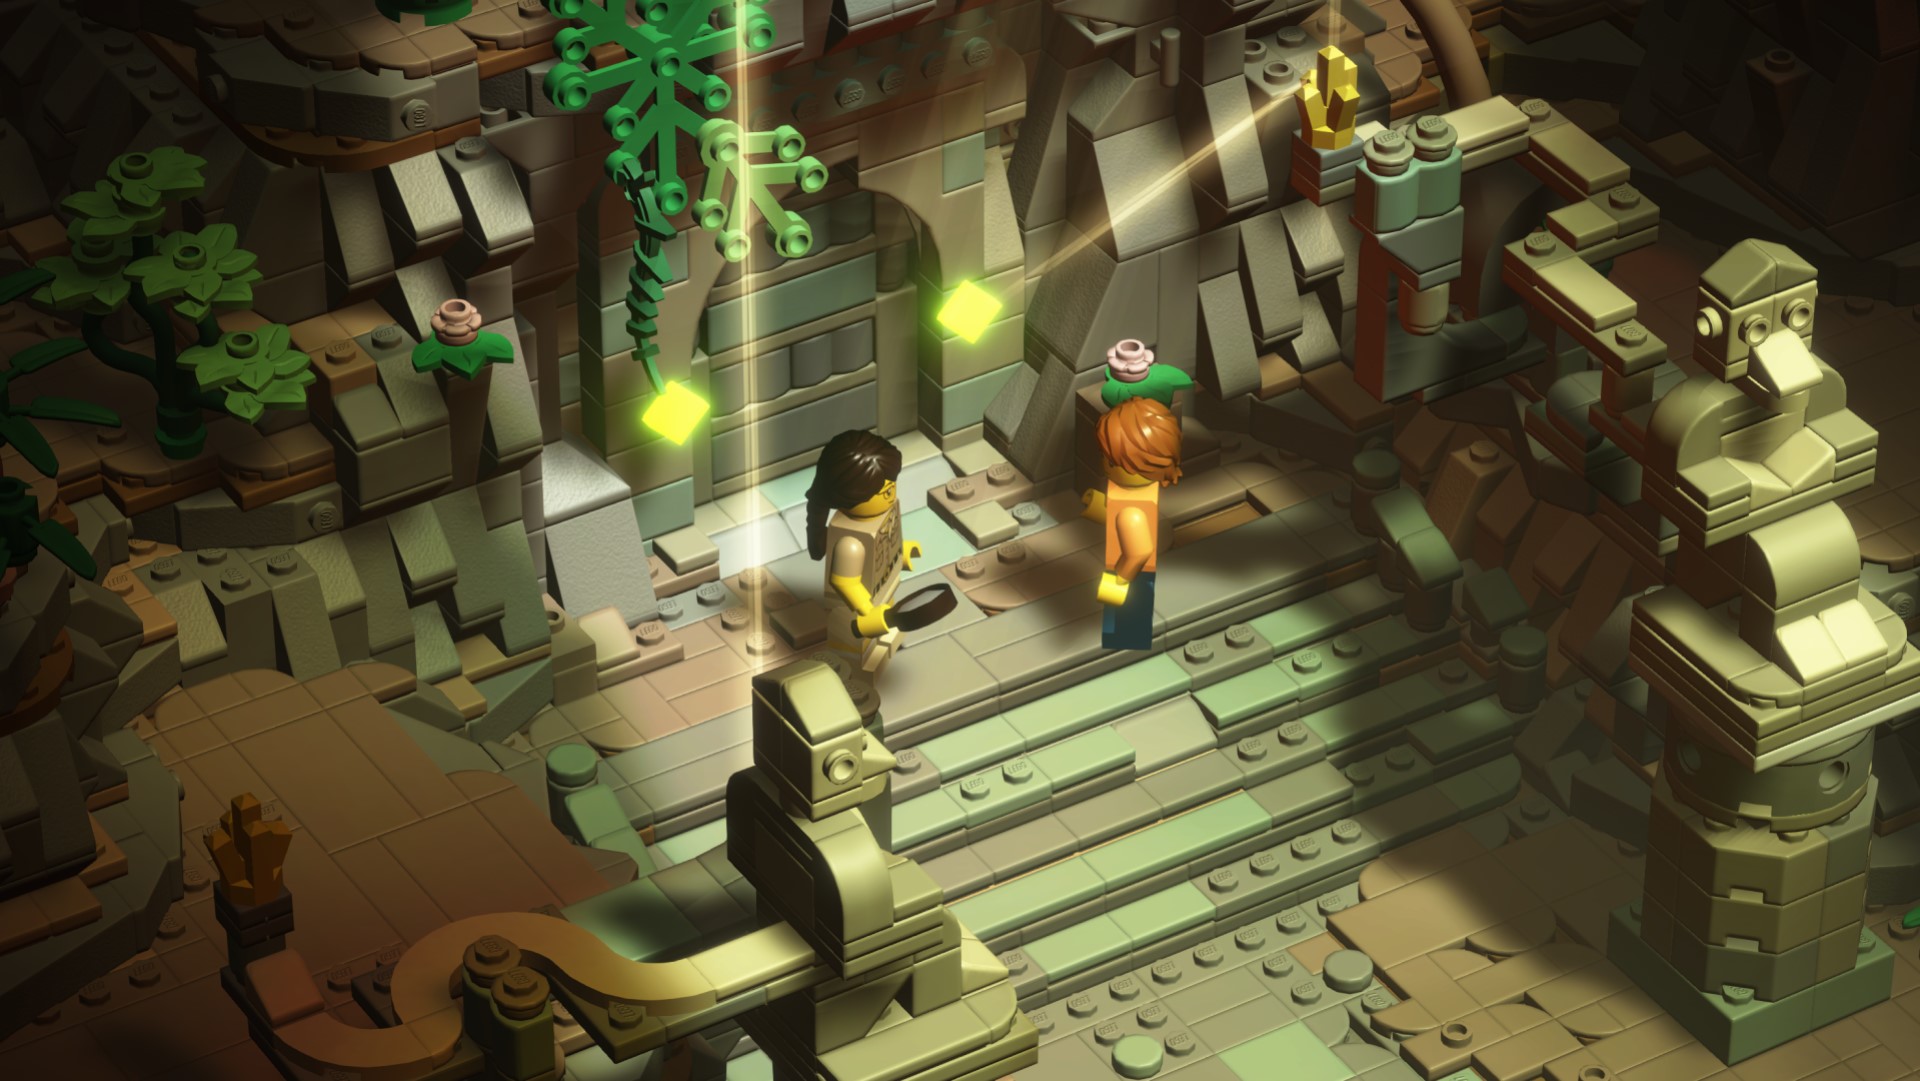 Lego Bricktales is a new puzzle game about bricks, not 